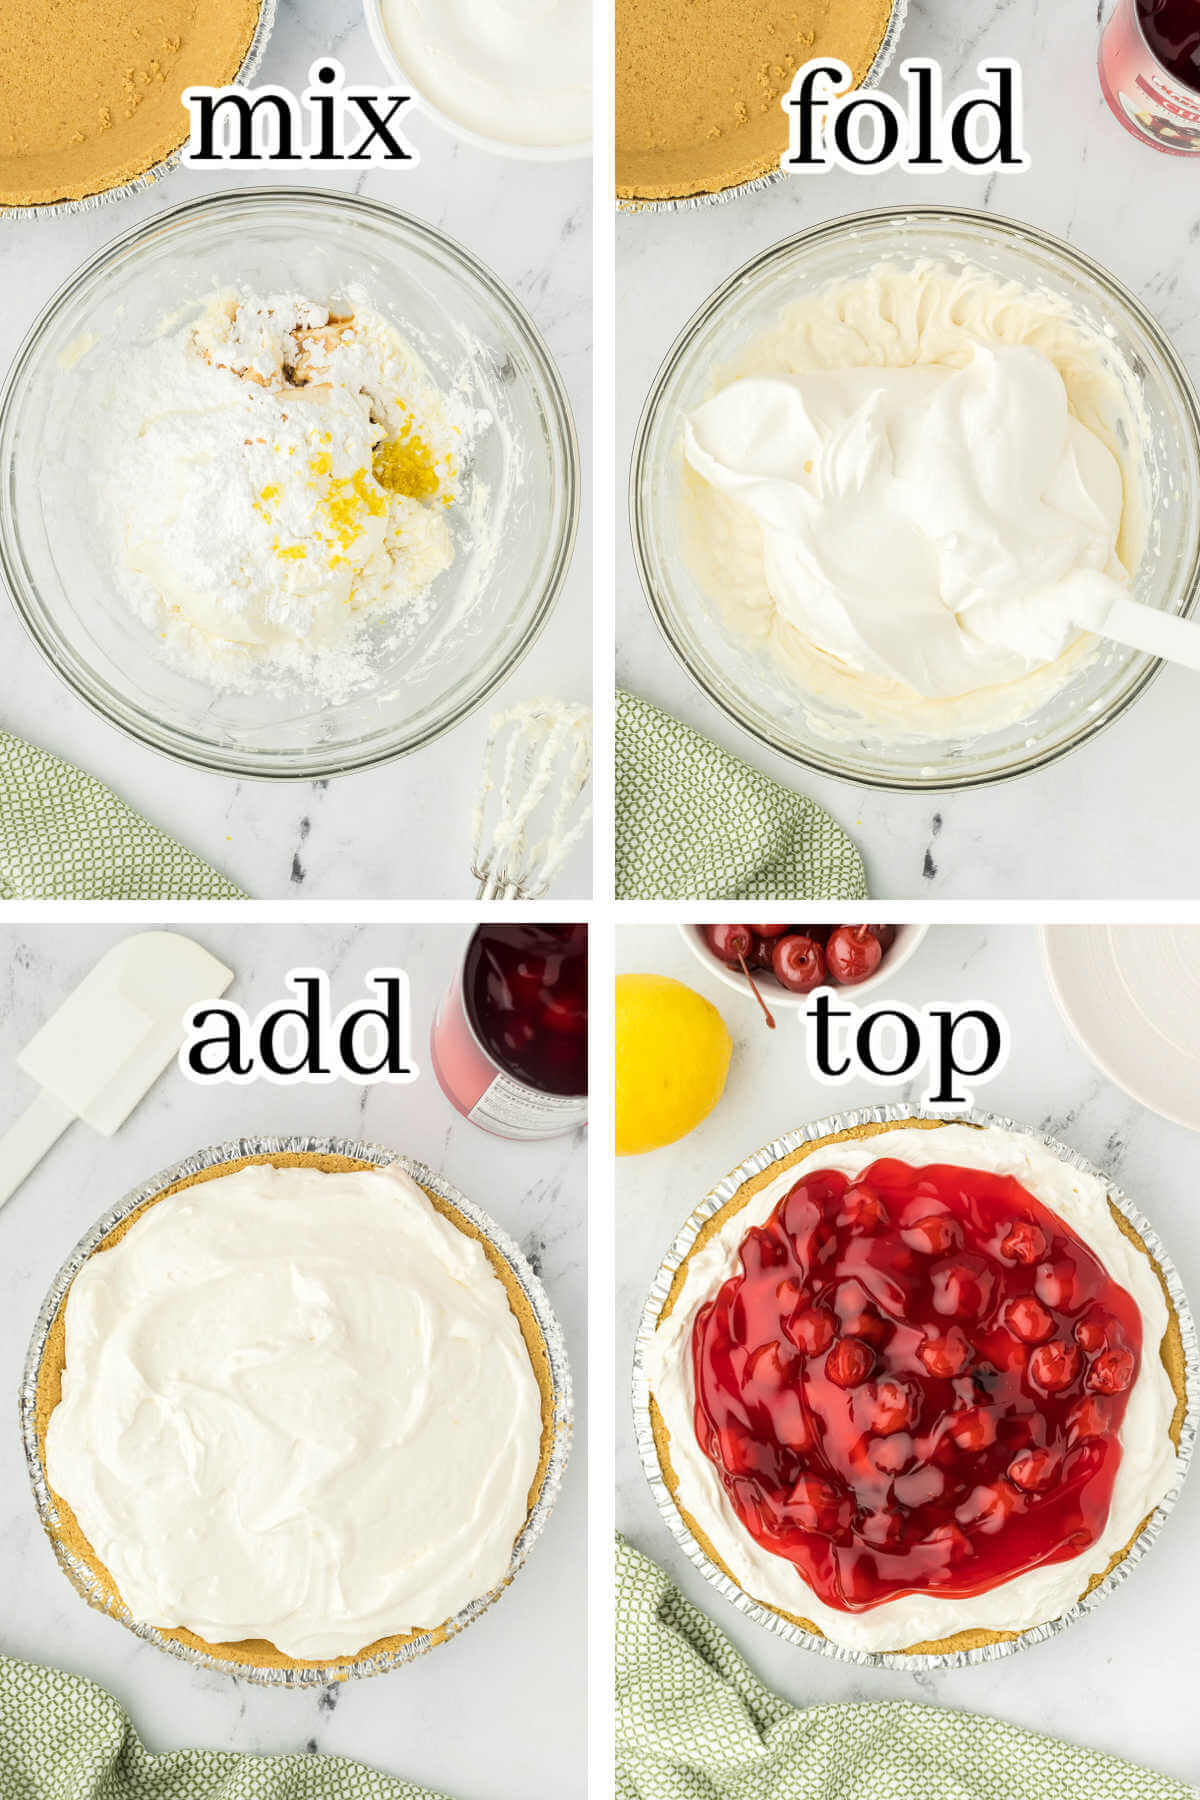 Step-by-step instructions to make the recipe with print overlay.